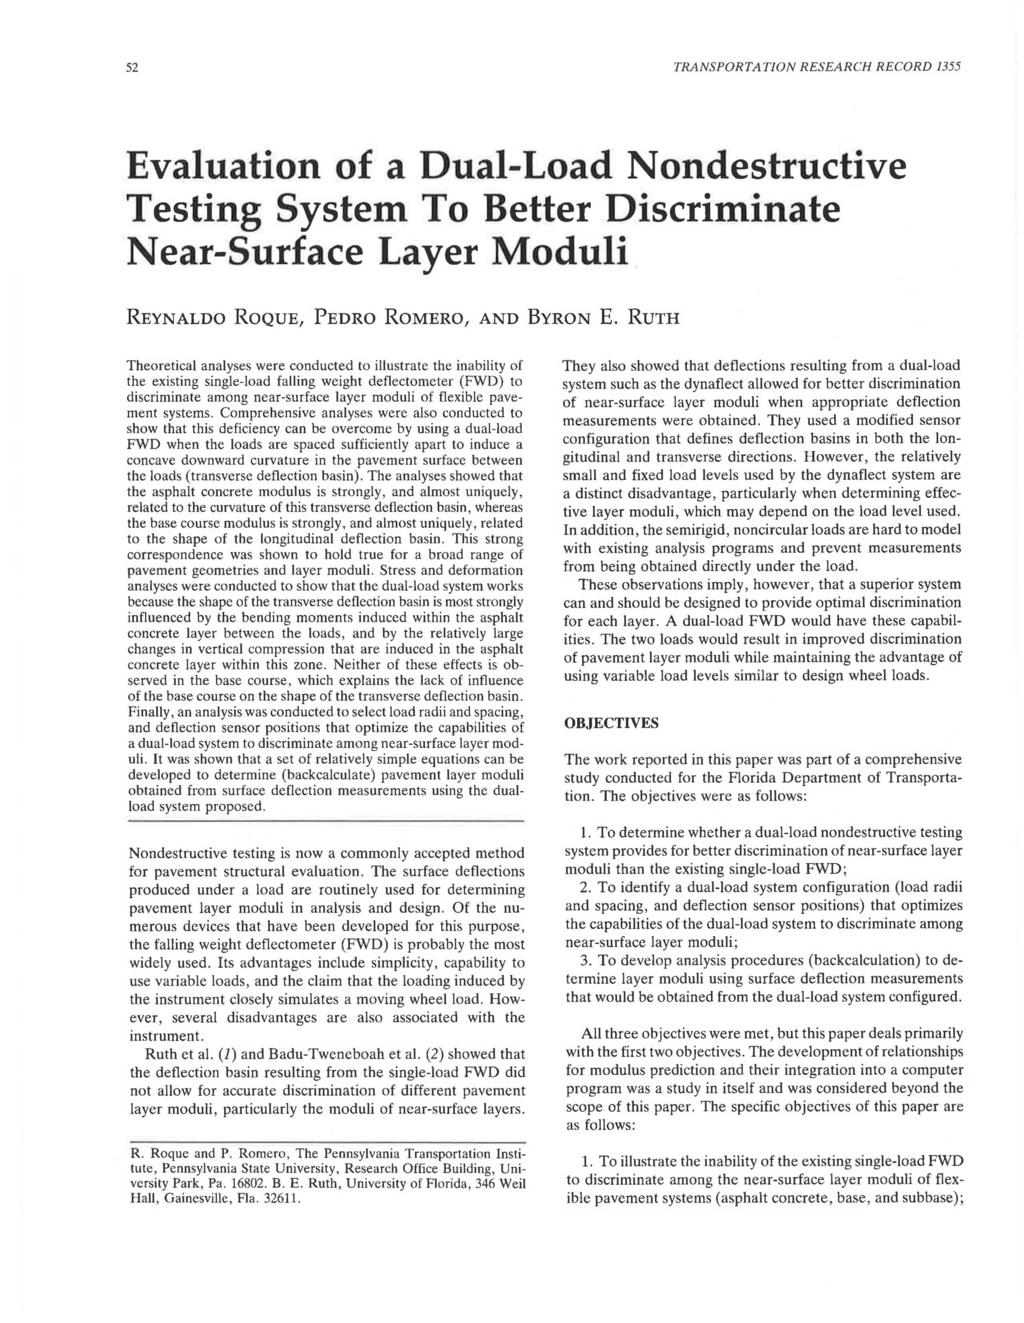 52 TRANSPORTATION RESEARCH RECORD 1355 Evaluation of a Dual-Load Nondestrutive Testing System To Better Disriminate Near-Surfae Layer Moduli REYNALDO ROQUE, PEDRO ROMERO, AND BYRON E.